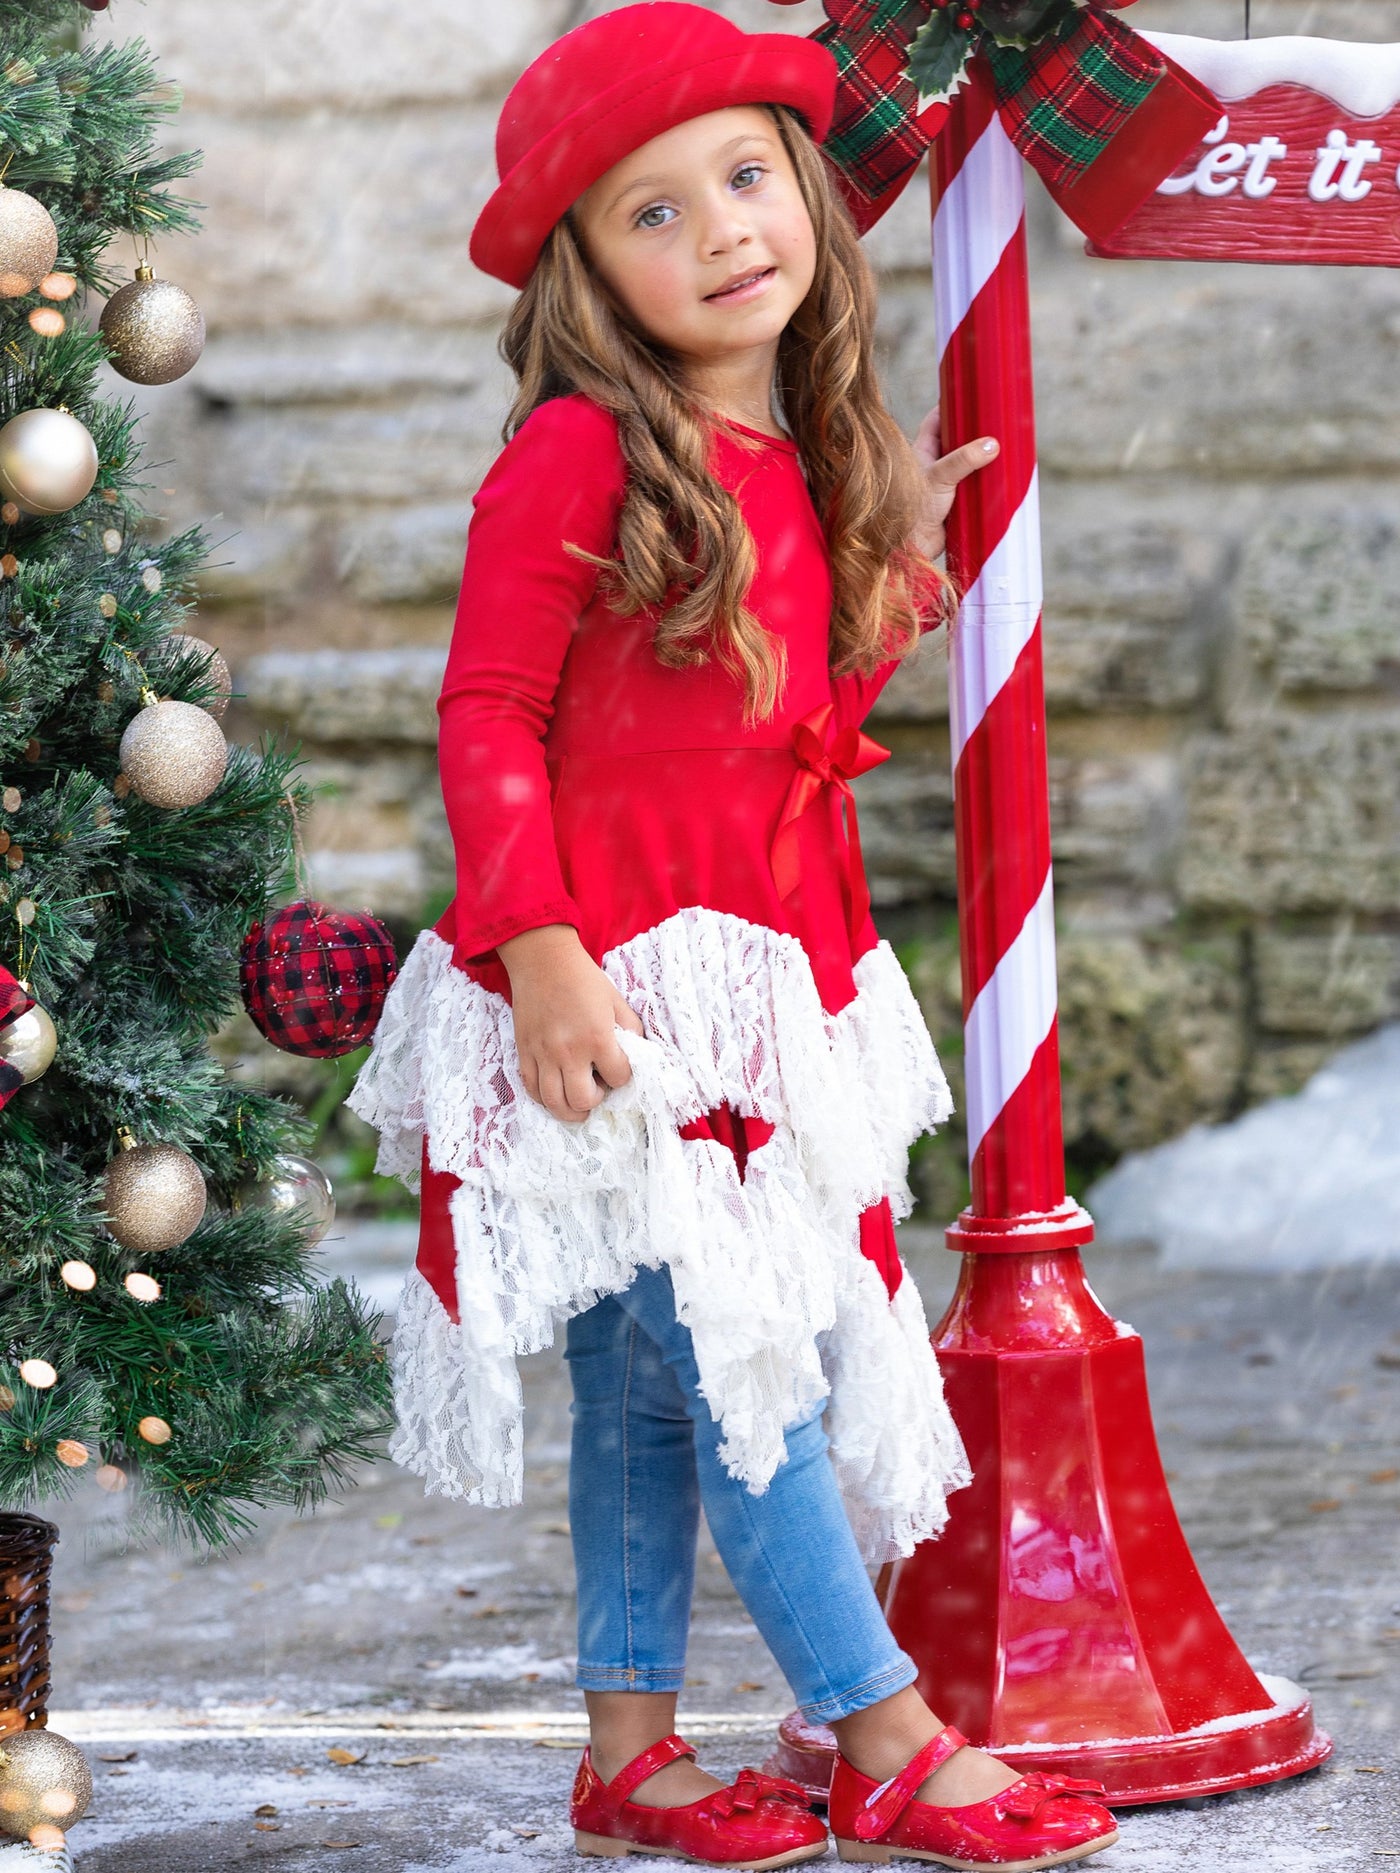 Little girls Fall long-sleeve tunic with handkerchief lace hem skirt and waistline bow applique - Mia Belle Girls